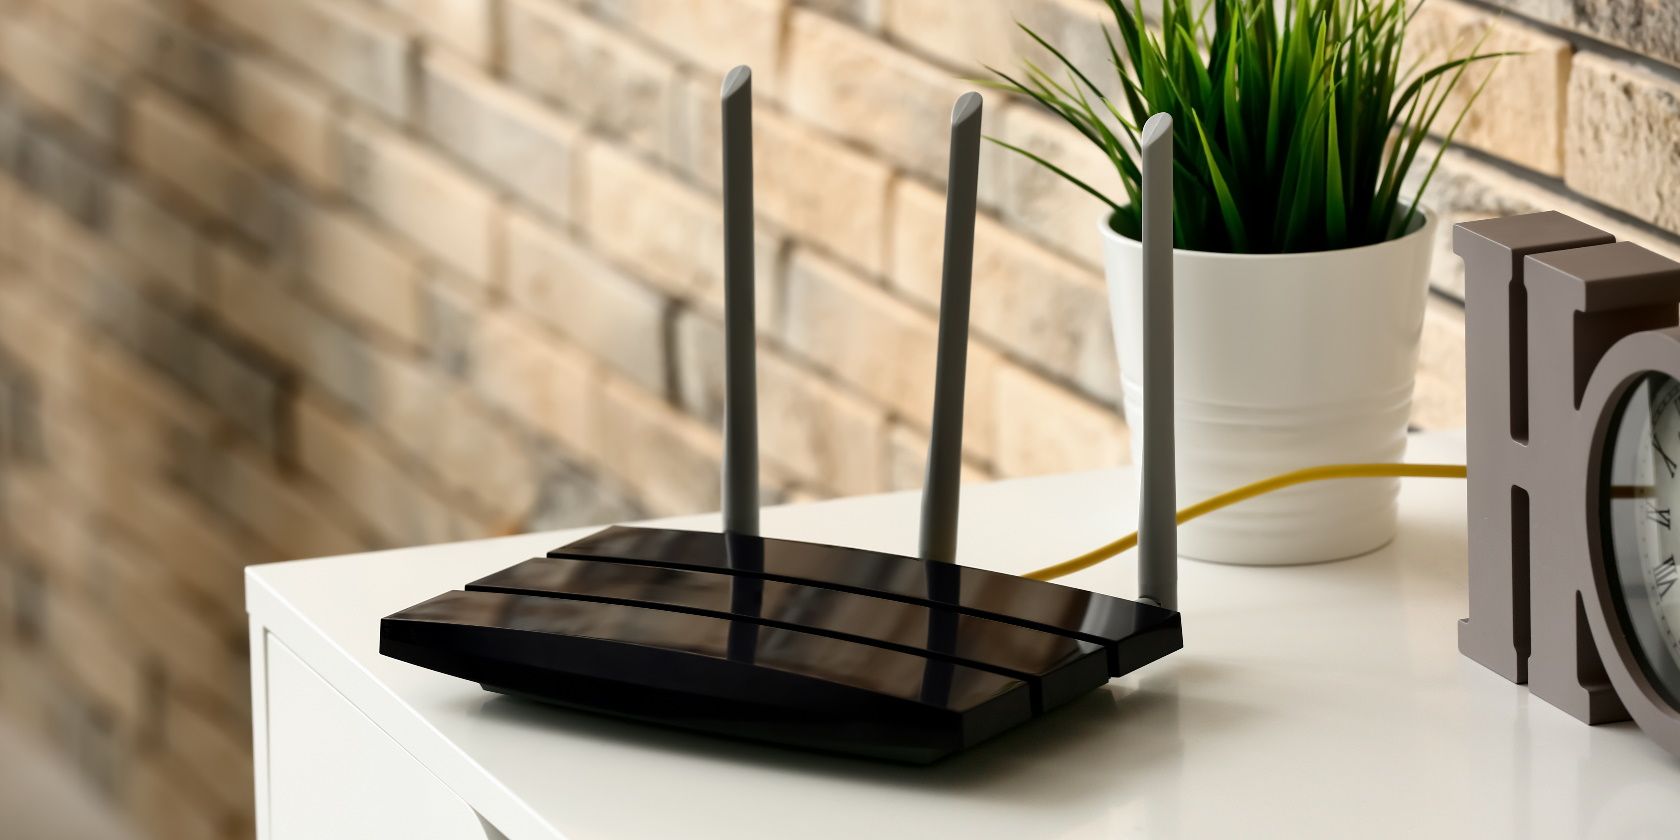 How to Boost Your Wi-Fi Speed Up to 5x With One Quick Fix